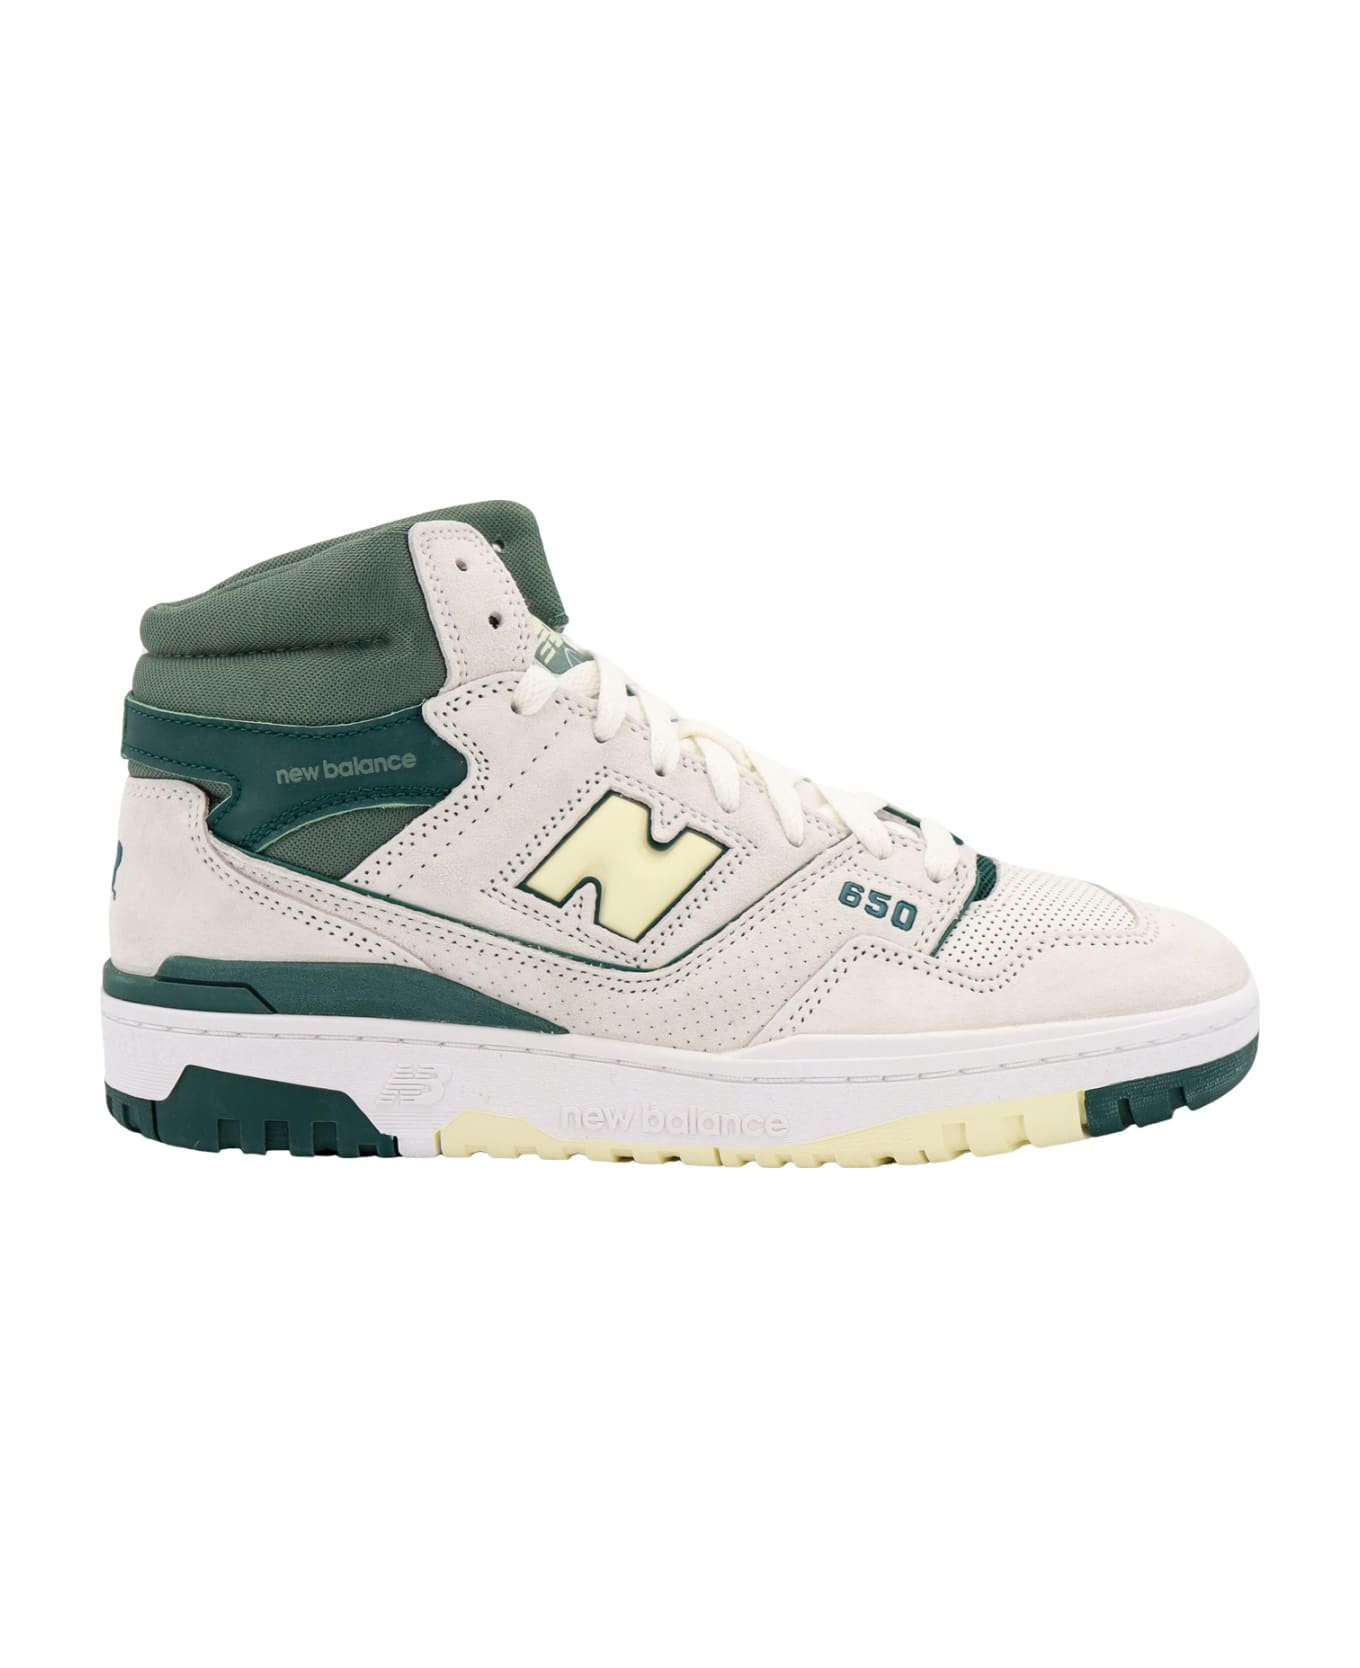 New Balance 650 Sneakers - Green